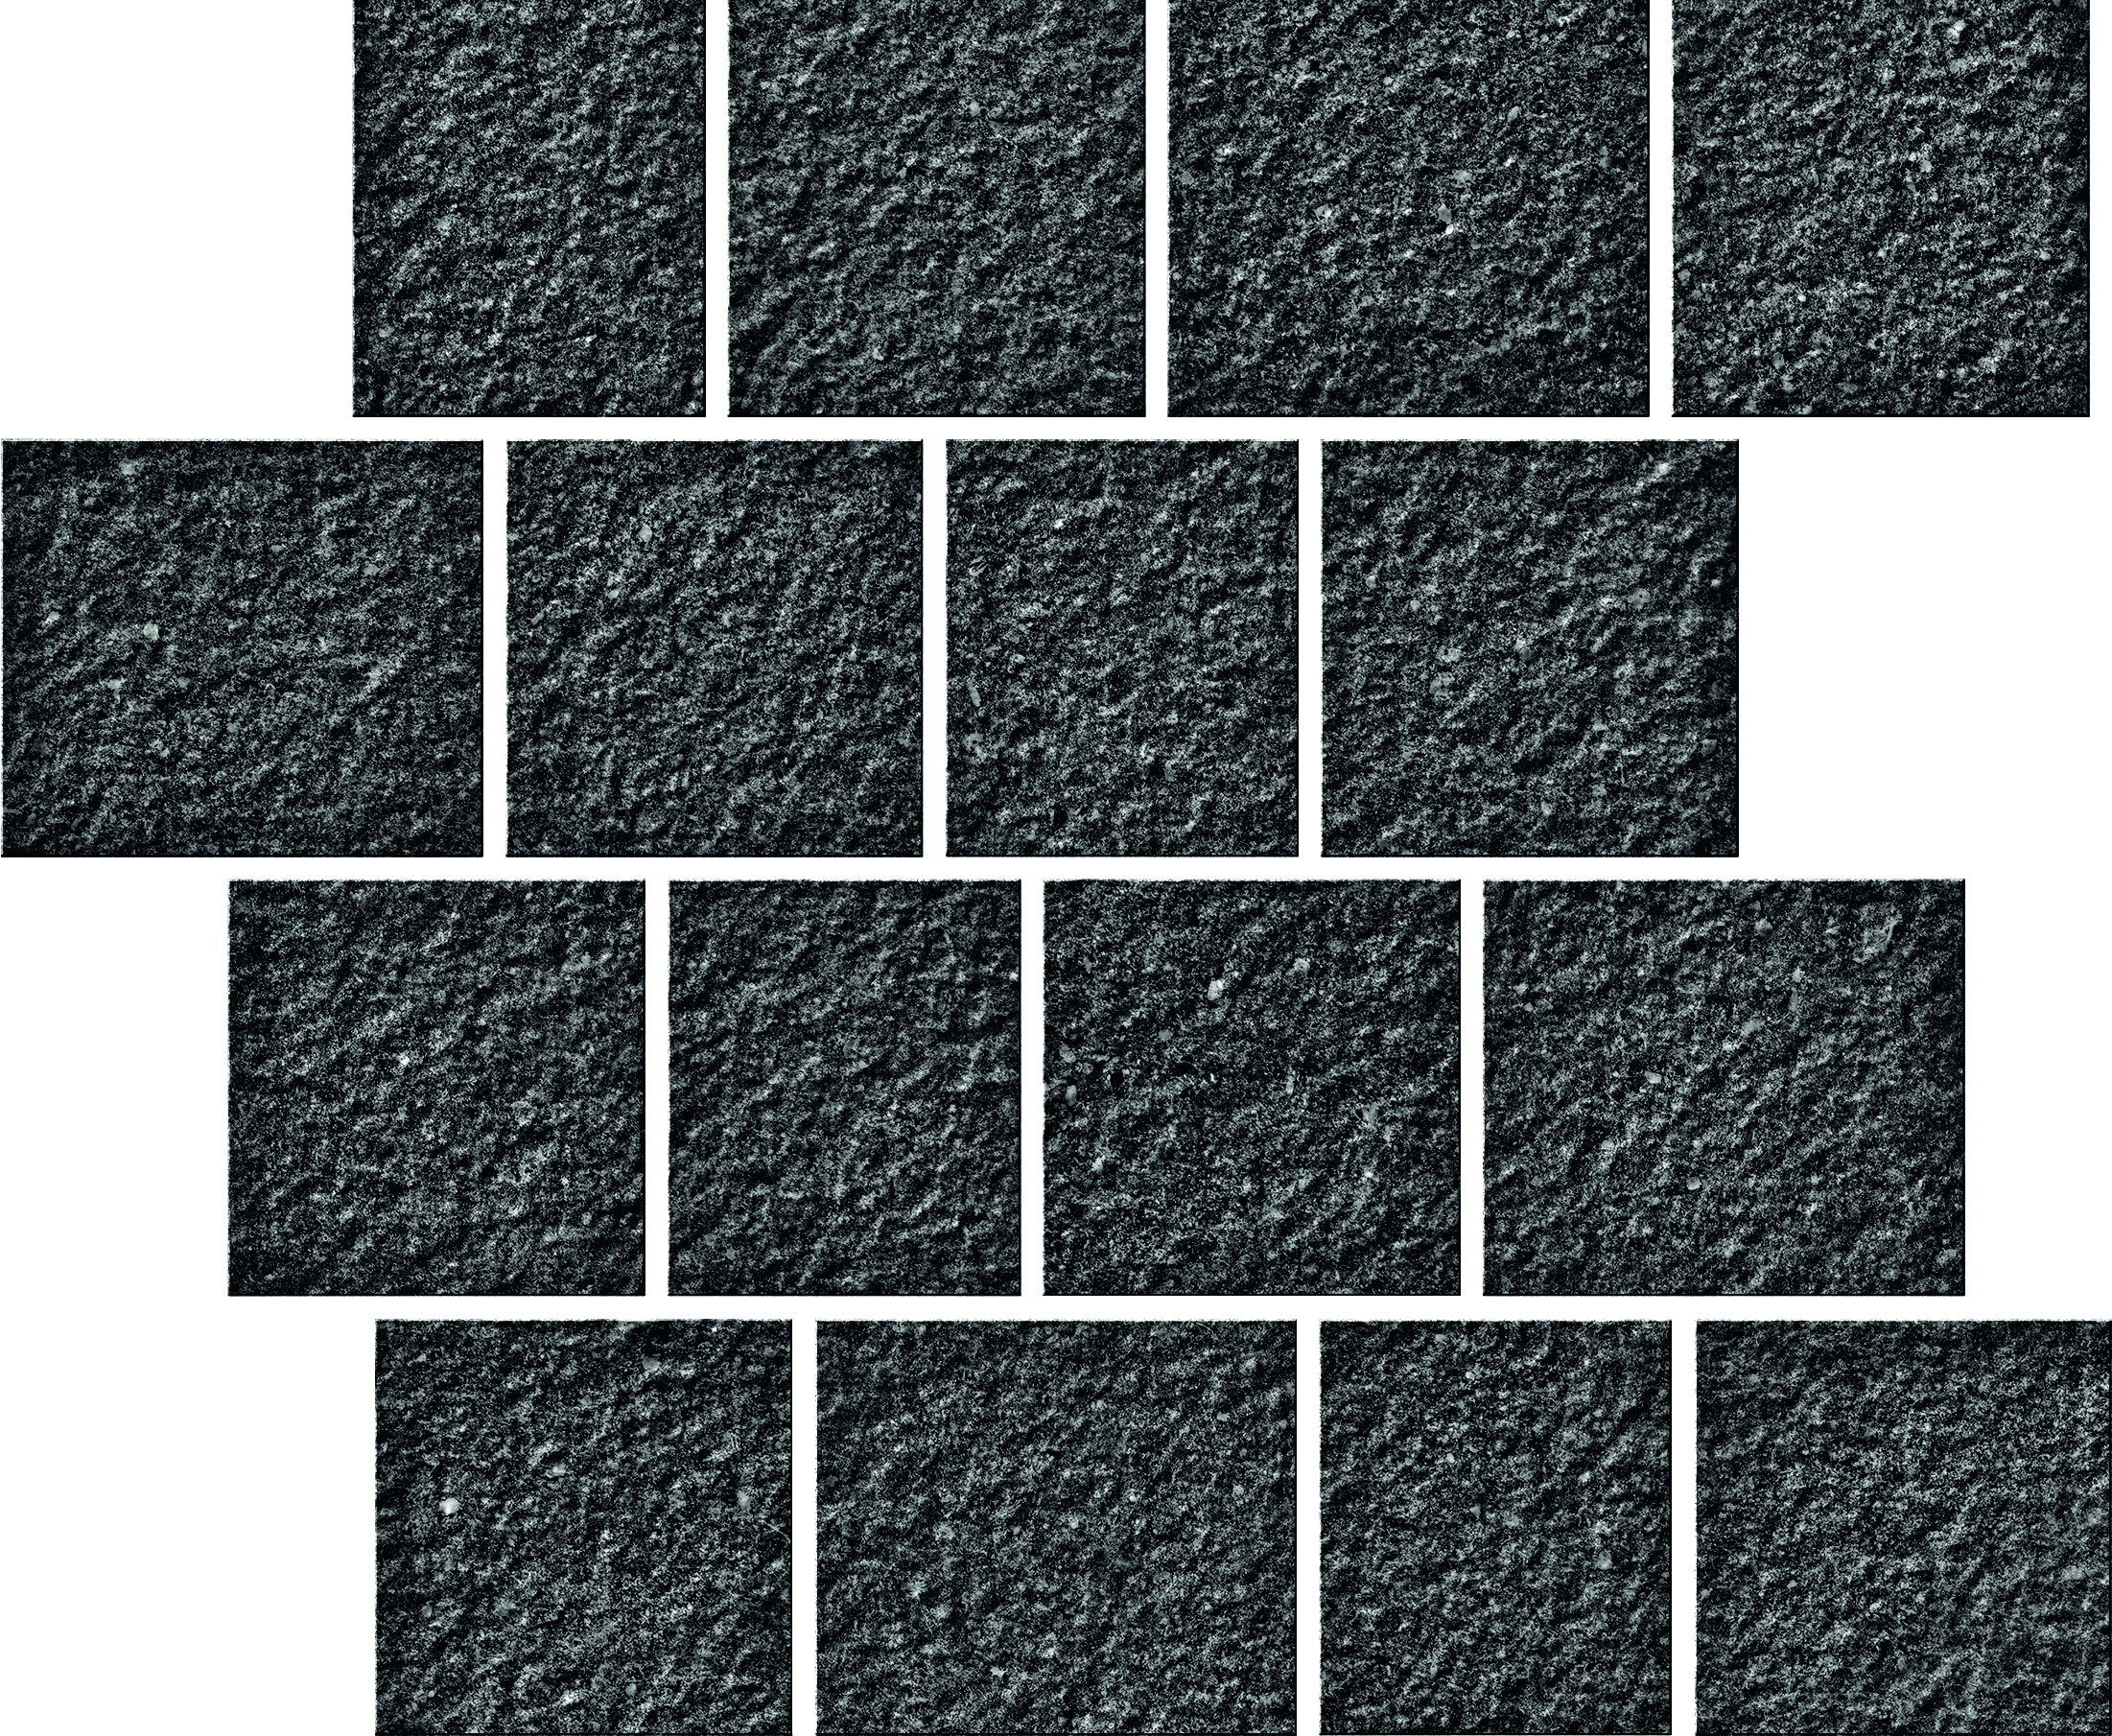 Serenissima Eclettica Nero Rock Mosaic Pave 1081800 30x30cm rectified 9,5mm